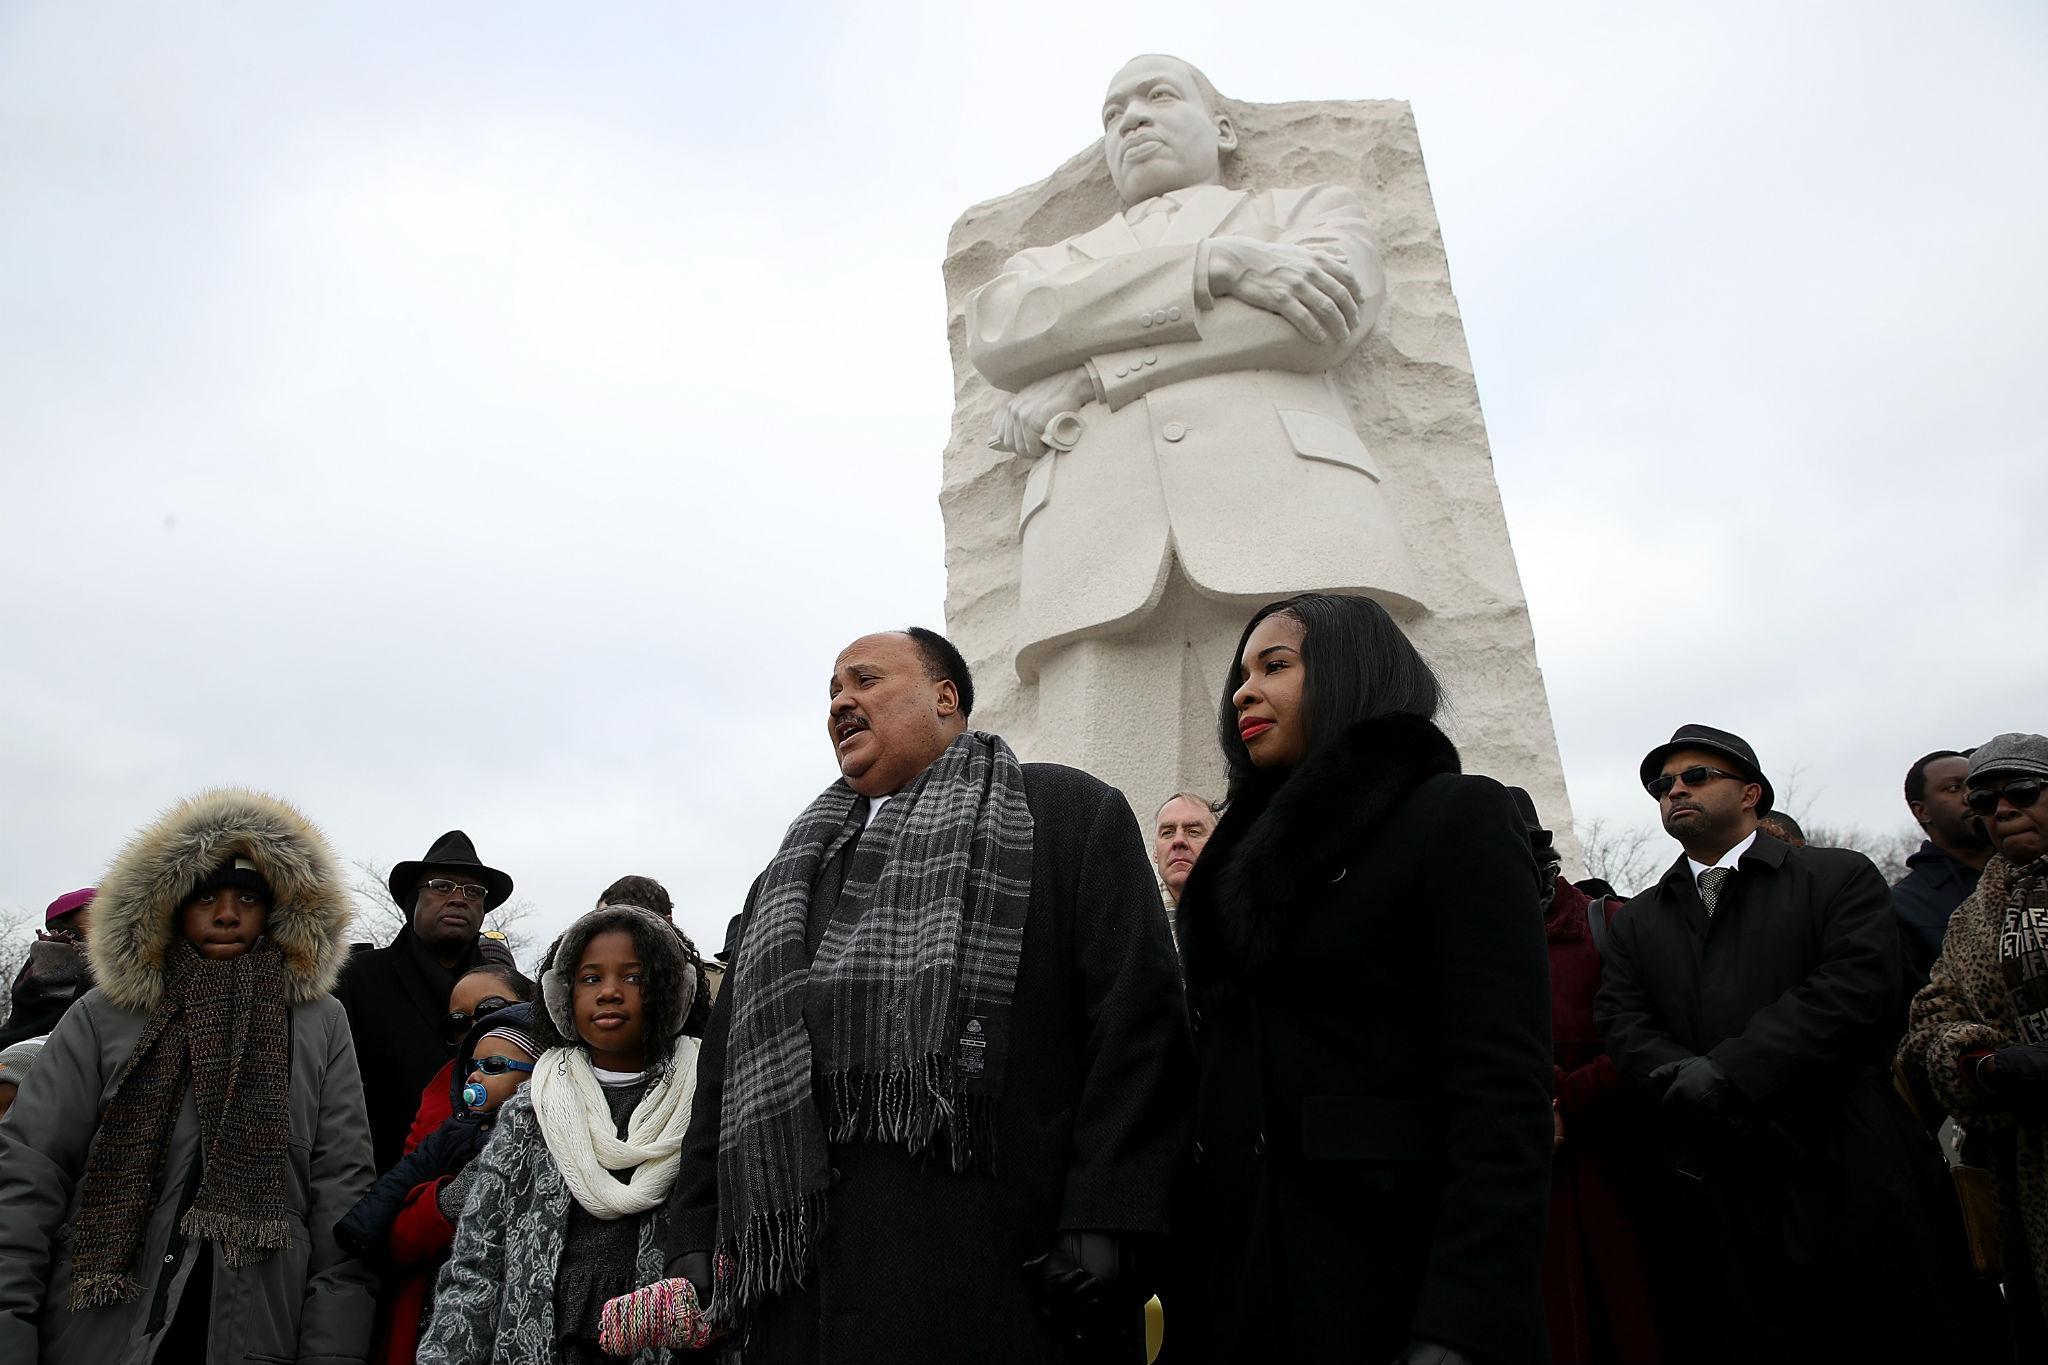 Martin Luther King III speaks in front of the Martin Luther King Jr Memorial on Martin Luther King Day January 15, 2018 in Washington DC